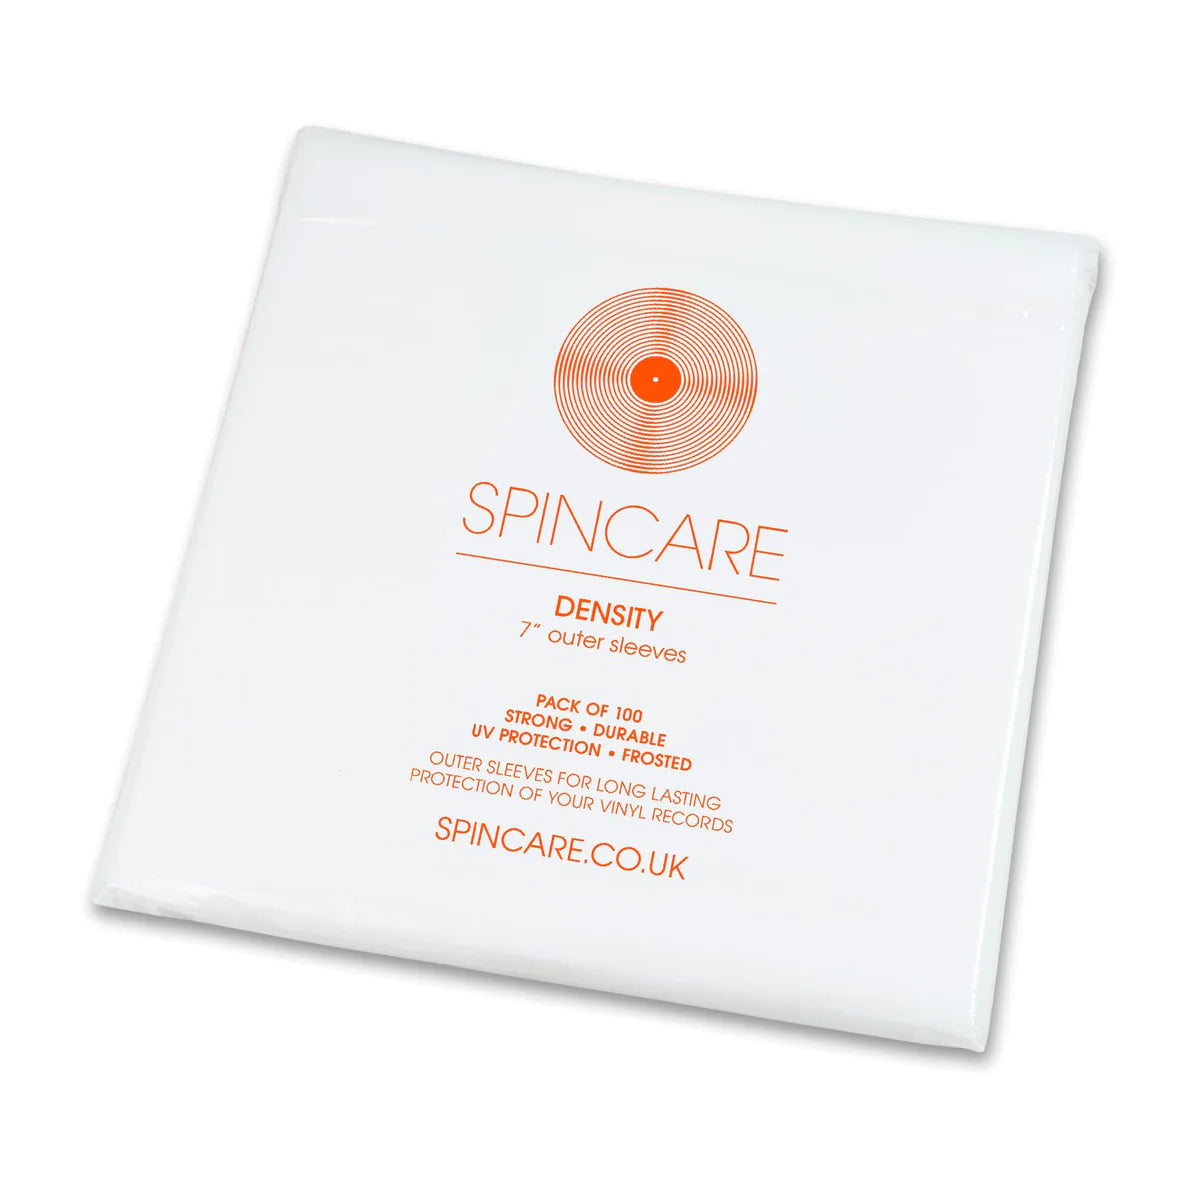 Spincare 'Density' 7" Polythene Outer Sleeves